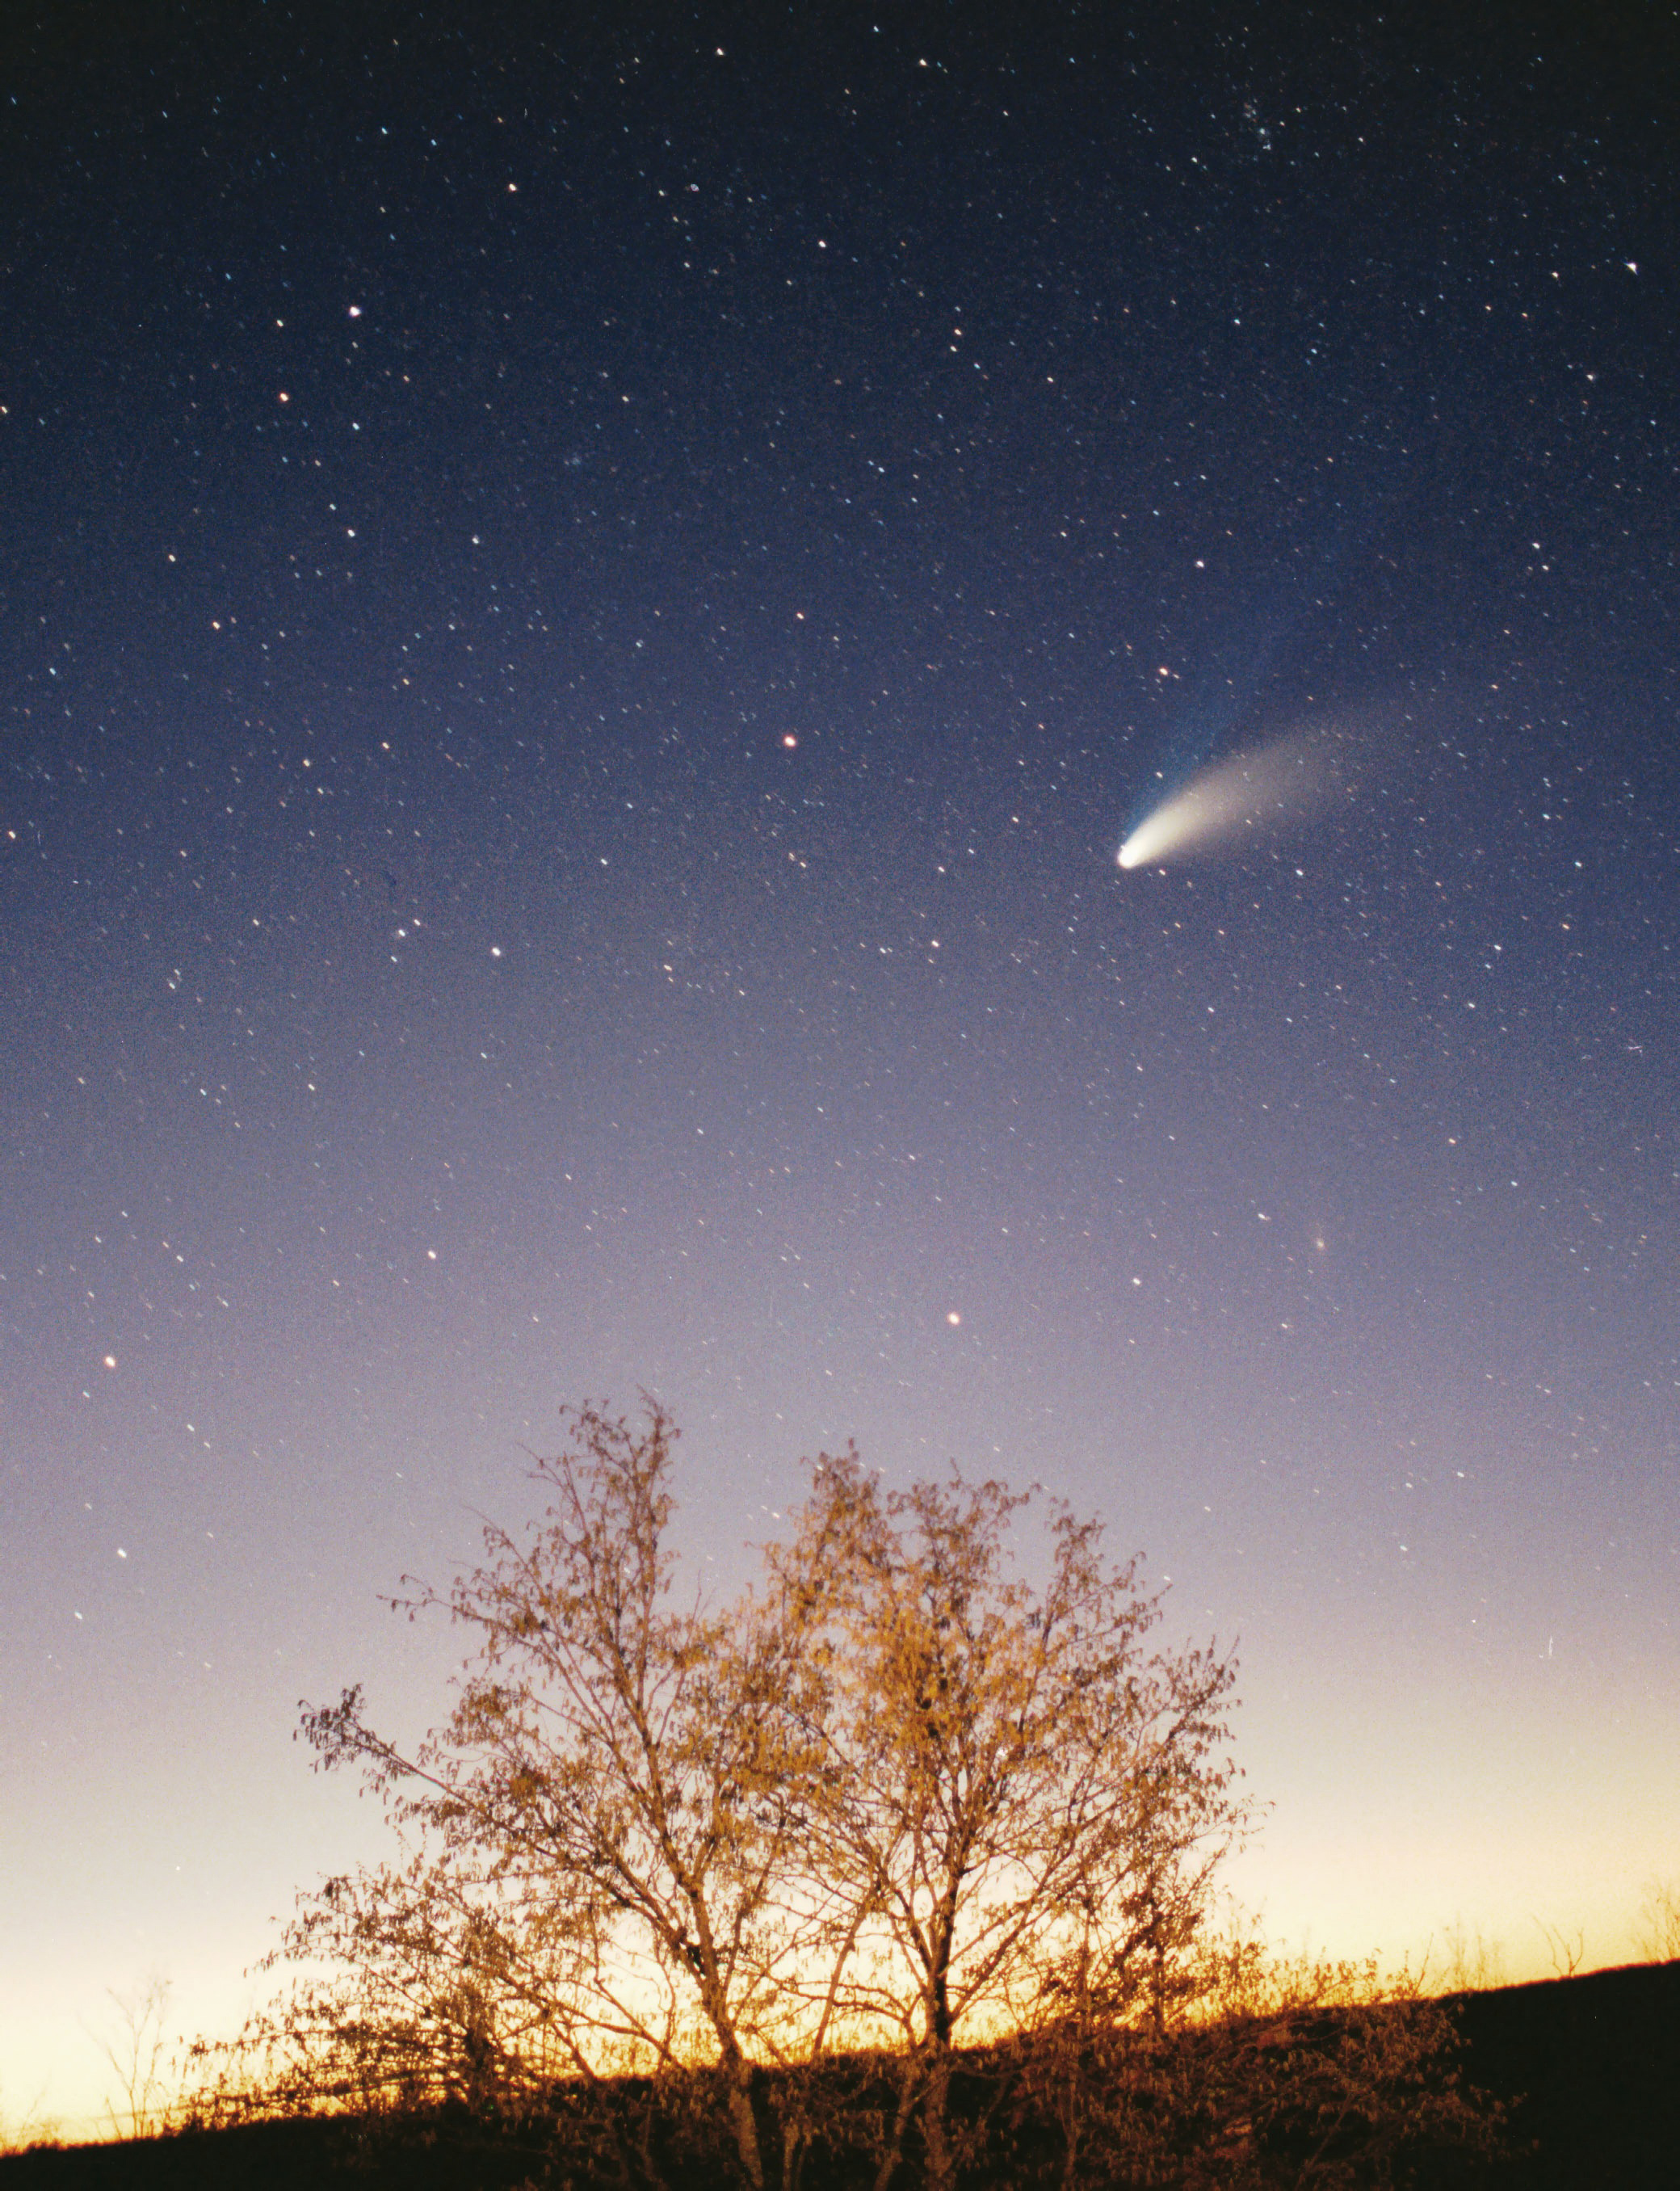 Comet Hale-Bopp is discovered; it will become visible to the naked eye nearly a year later